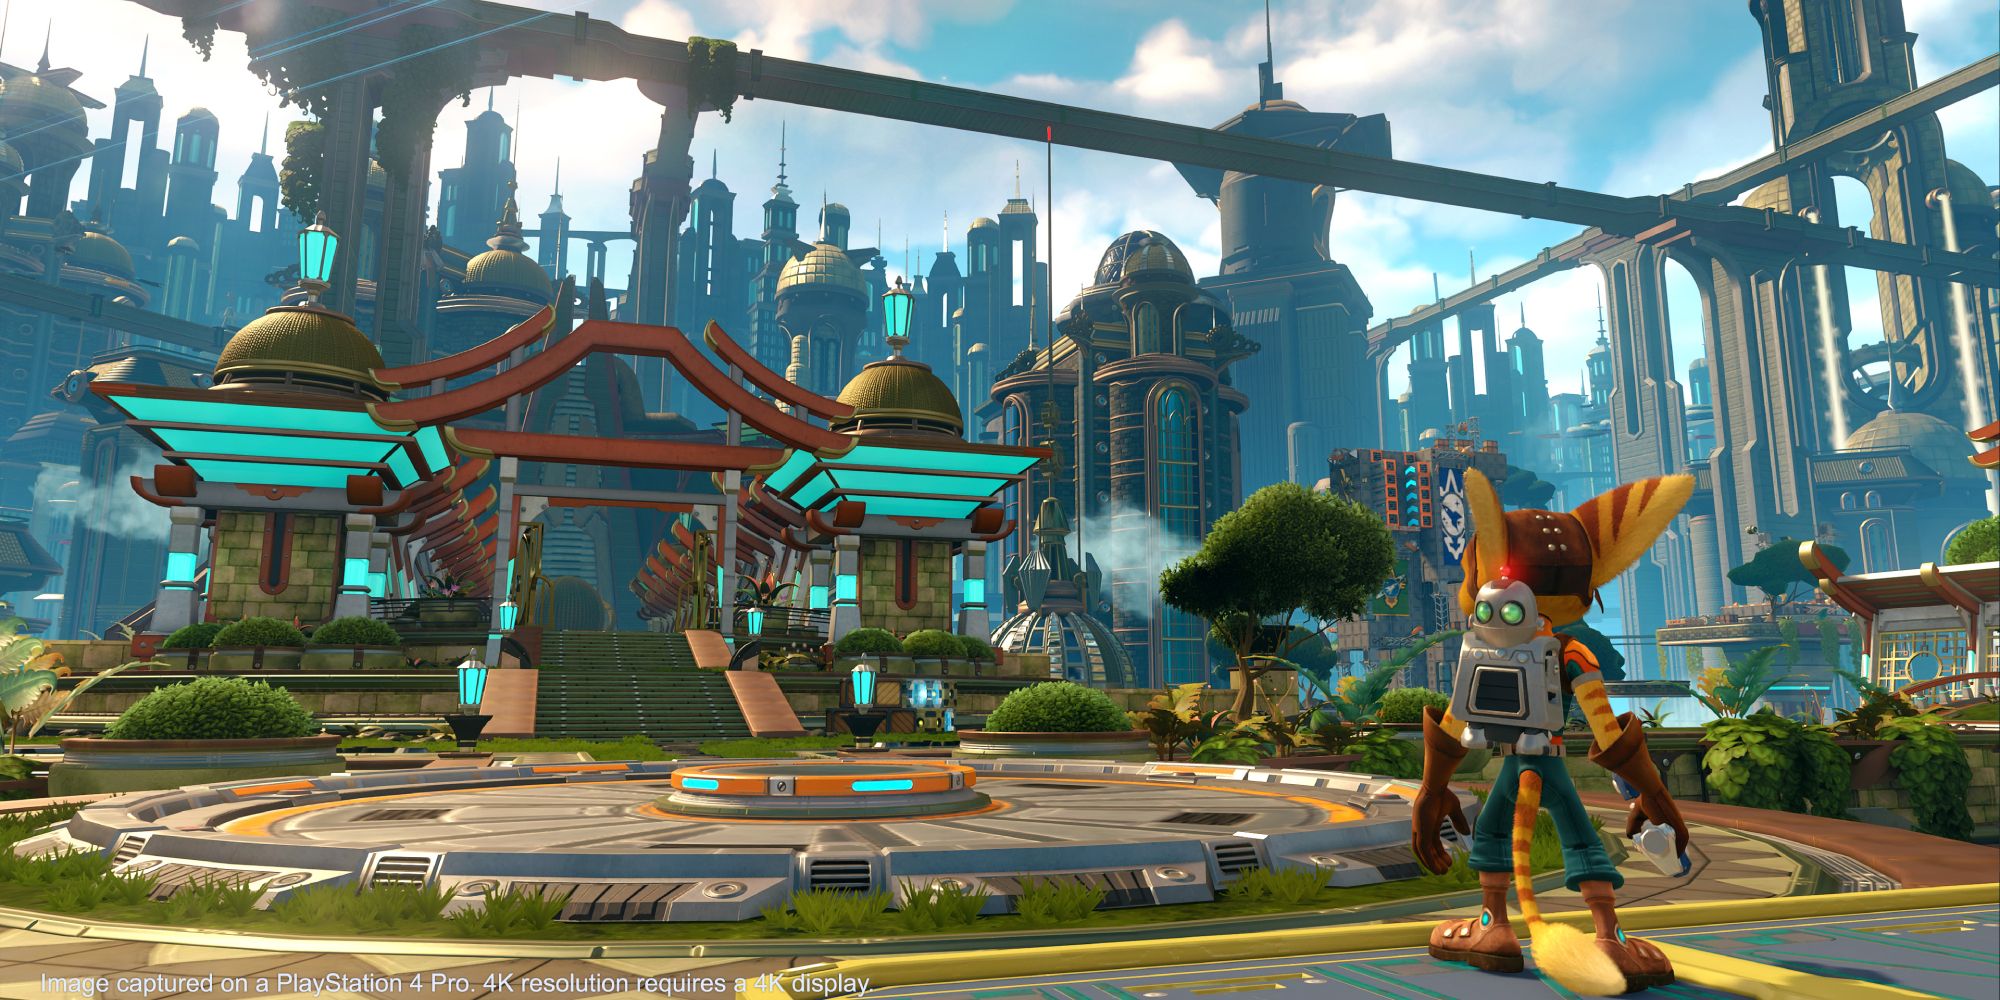 Best Fictional Planets a wide shot of Ratchet from the game Ratchet & Clank stood looking at the futuristic metropolis looming in the distance on the planet Kerwan